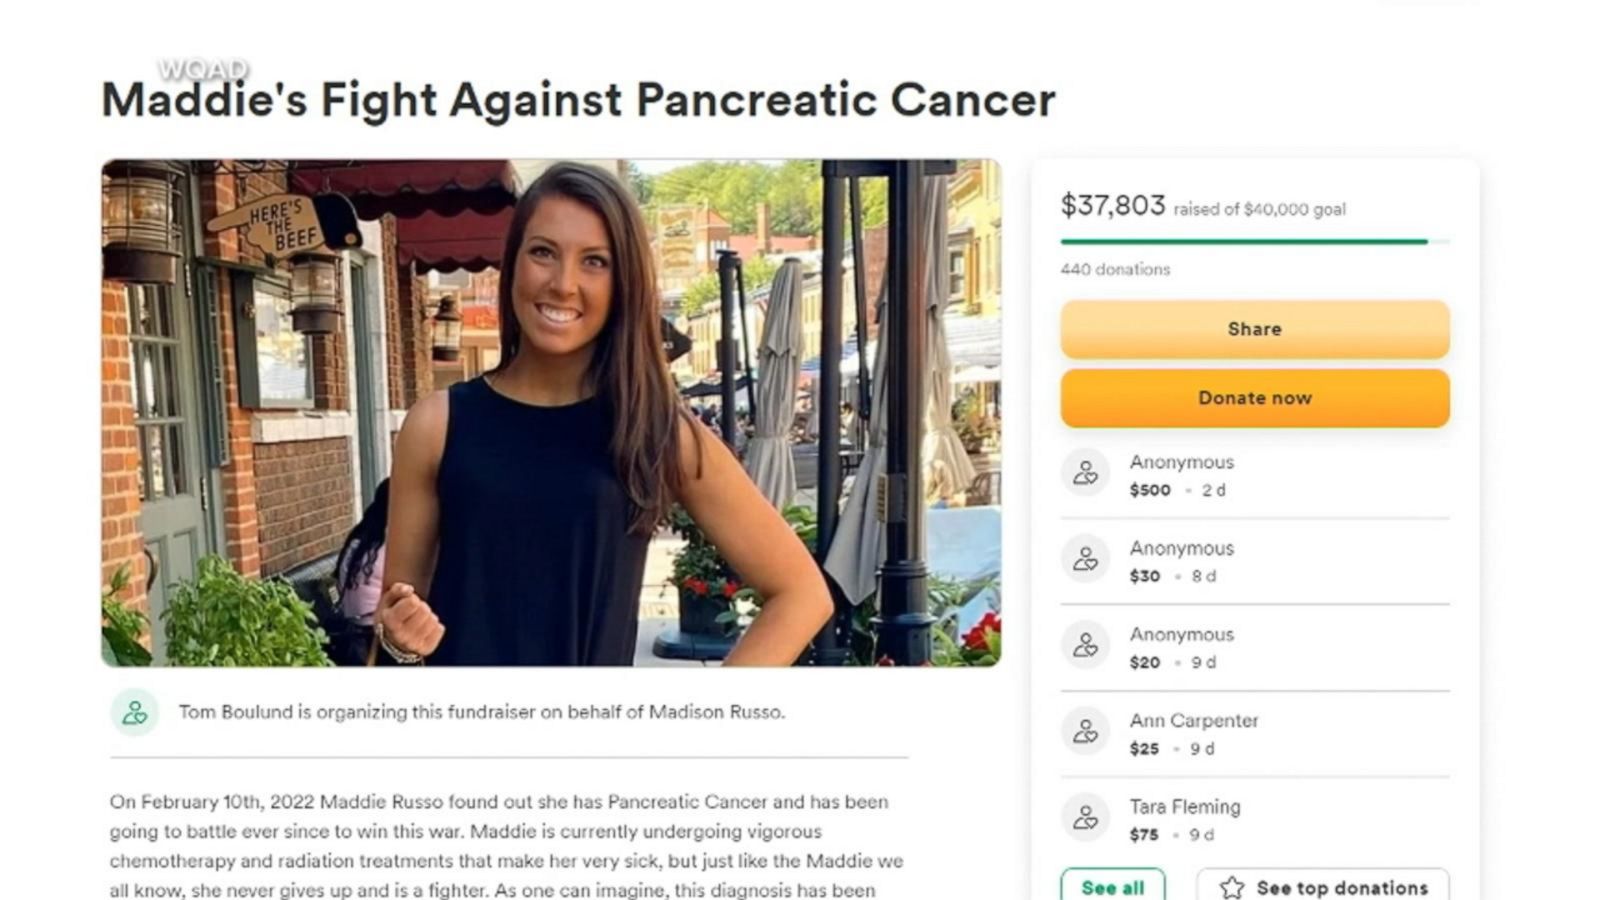 Woman charged after allegedly faking cancer diagnosis